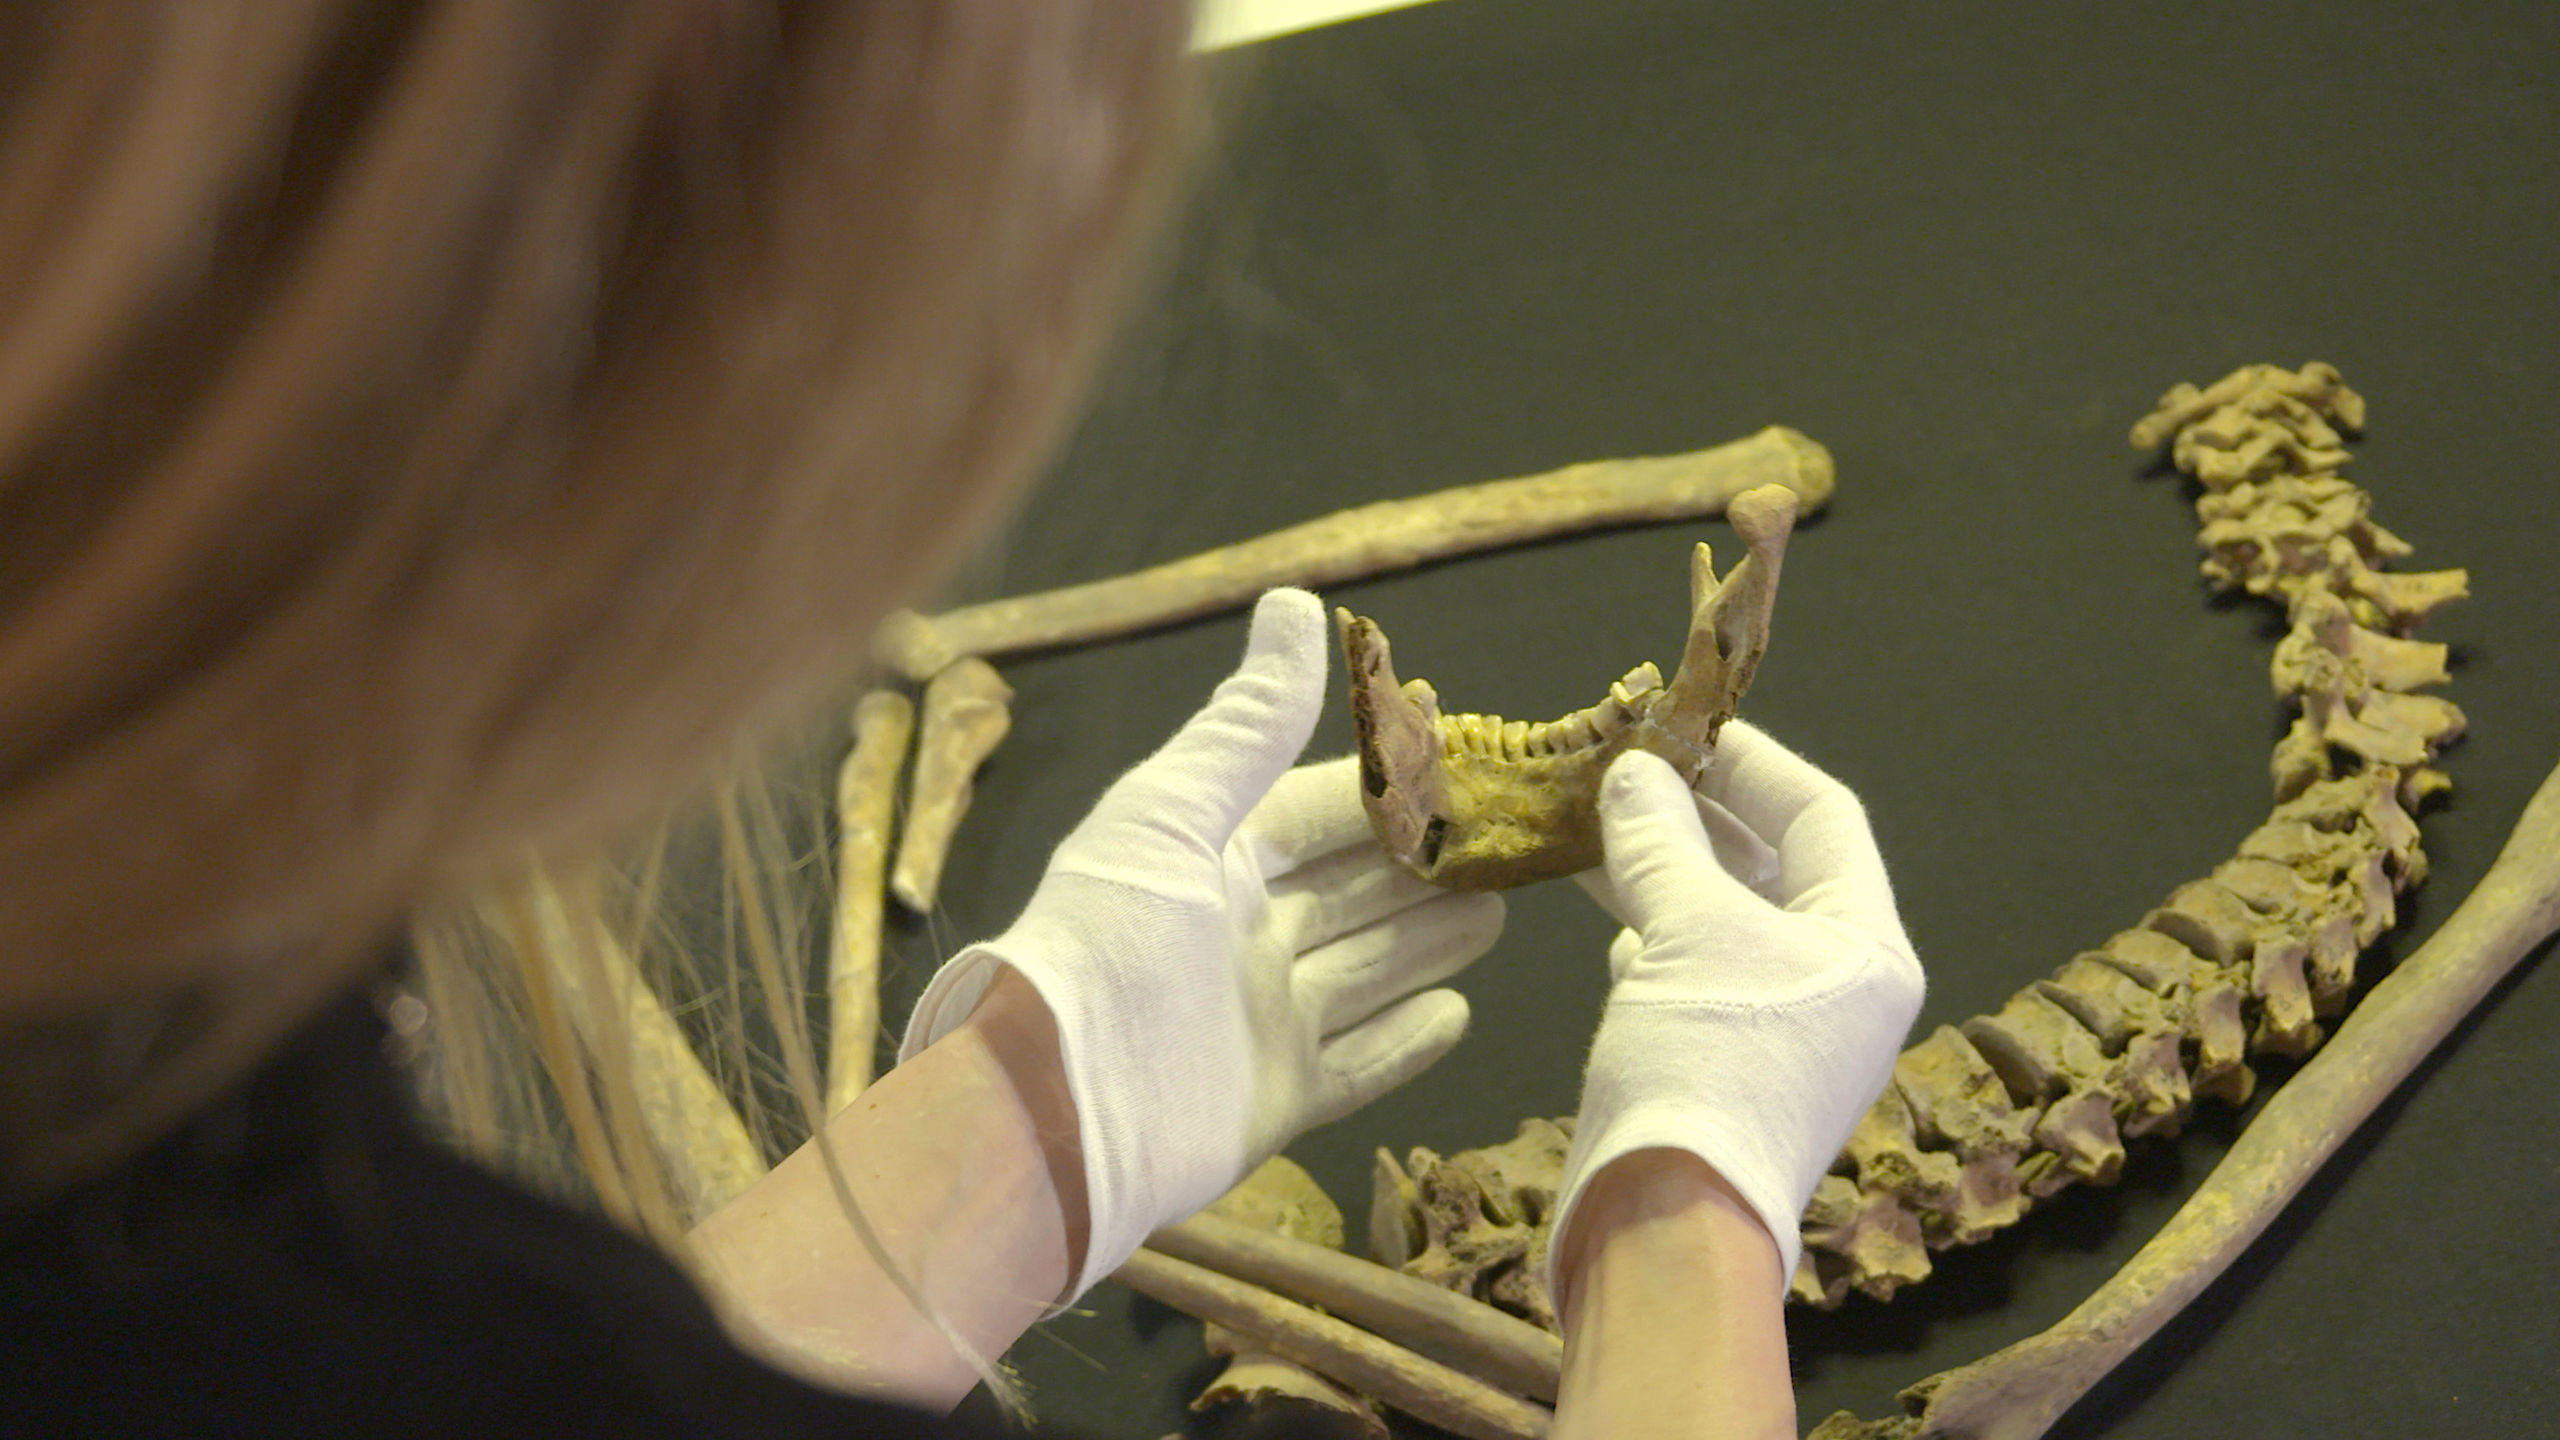 Scientist examines the lower jaw and other skeletal remains from grave Bj 581. (Courtesy of Peignoir Prod)